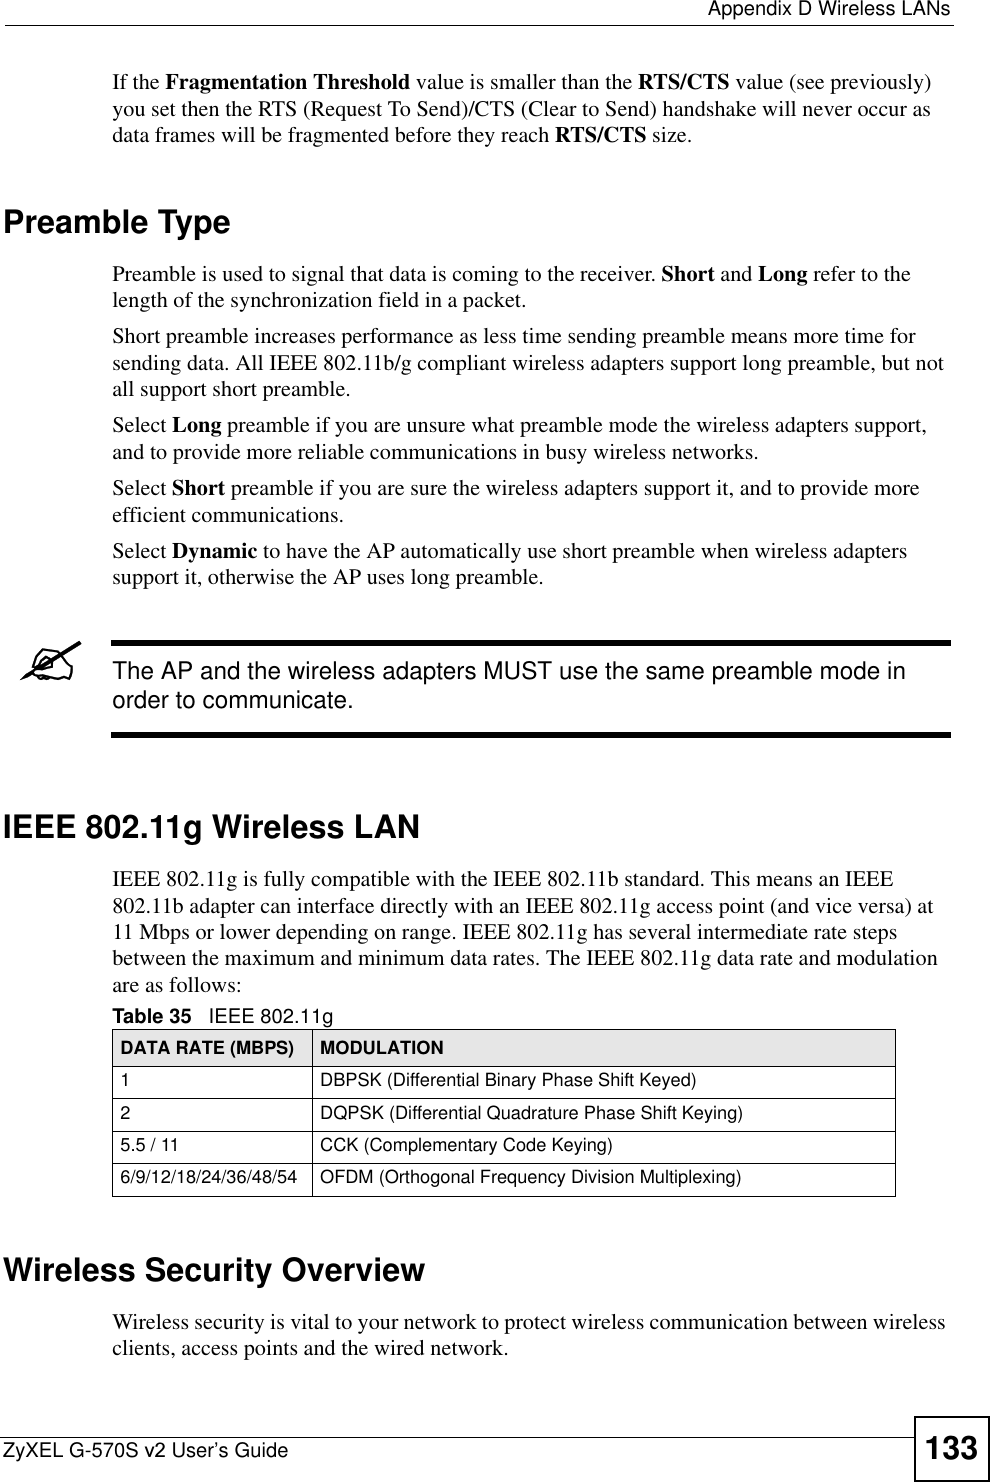  Appendix D Wireless LANsZyXEL G-570S v2 User’s Guide 133If the Fragmentation Threshold value is smaller than the RTS/CTS value (see previously) you set then the RTS (Request To Send)/CTS (Clear to Send) handshake will never occur as data frames will be fragmented before they reach RTS/CTS size.Preamble TypePreamble is used to signal that data is coming to the receiver. Short and Long refer to the length of the synchronization field in a packet.Short preamble increases performance as less time sending preamble means more time for sending data. All IEEE 802.11b/g compliant wireless adapters support long preamble, but not all support short preamble. Select Long preamble if you are unsure what preamble mode the wireless adapters support, and to provide more reliable communications in busy wireless networks. Select Short preamble if you are sure the wireless adapters support it, and to provide more efficient communications.Select Dynamic to have the AP automatically use short preamble when wireless adapters support it, otherwise the AP uses long preamble.&quot;The AP and the wireless adapters MUST use the same preamble mode in order to communicate.IEEE 802.11g Wireless LANIEEE 802.11g is fully compatible with the IEEE 802.11b standard. This means an IEEE 802.11b adapter can interface directly with an IEEE 802.11g access point (and vice versa) at 11 Mbps or lower depending on range. IEEE 802.11g has several intermediate rate steps between the maximum and minimum data rates. The IEEE 802.11g data rate and modulation are as follows:Wireless Security OverviewWireless security is vital to your network to protect wireless communication between wireless clients, access points and the wired network.Table 35   IEEE 802.11gDATA RATE (MBPS) MODULATION1 DBPSK (Differential Binary Phase Shift Keyed)2 DQPSK (Differential Quadrature Phase Shift Keying)5.5 / 11 CCK (Complementary Code Keying) 6/9/12/18/24/36/48/54 OFDM (Orthogonal Frequency Division Multiplexing) 